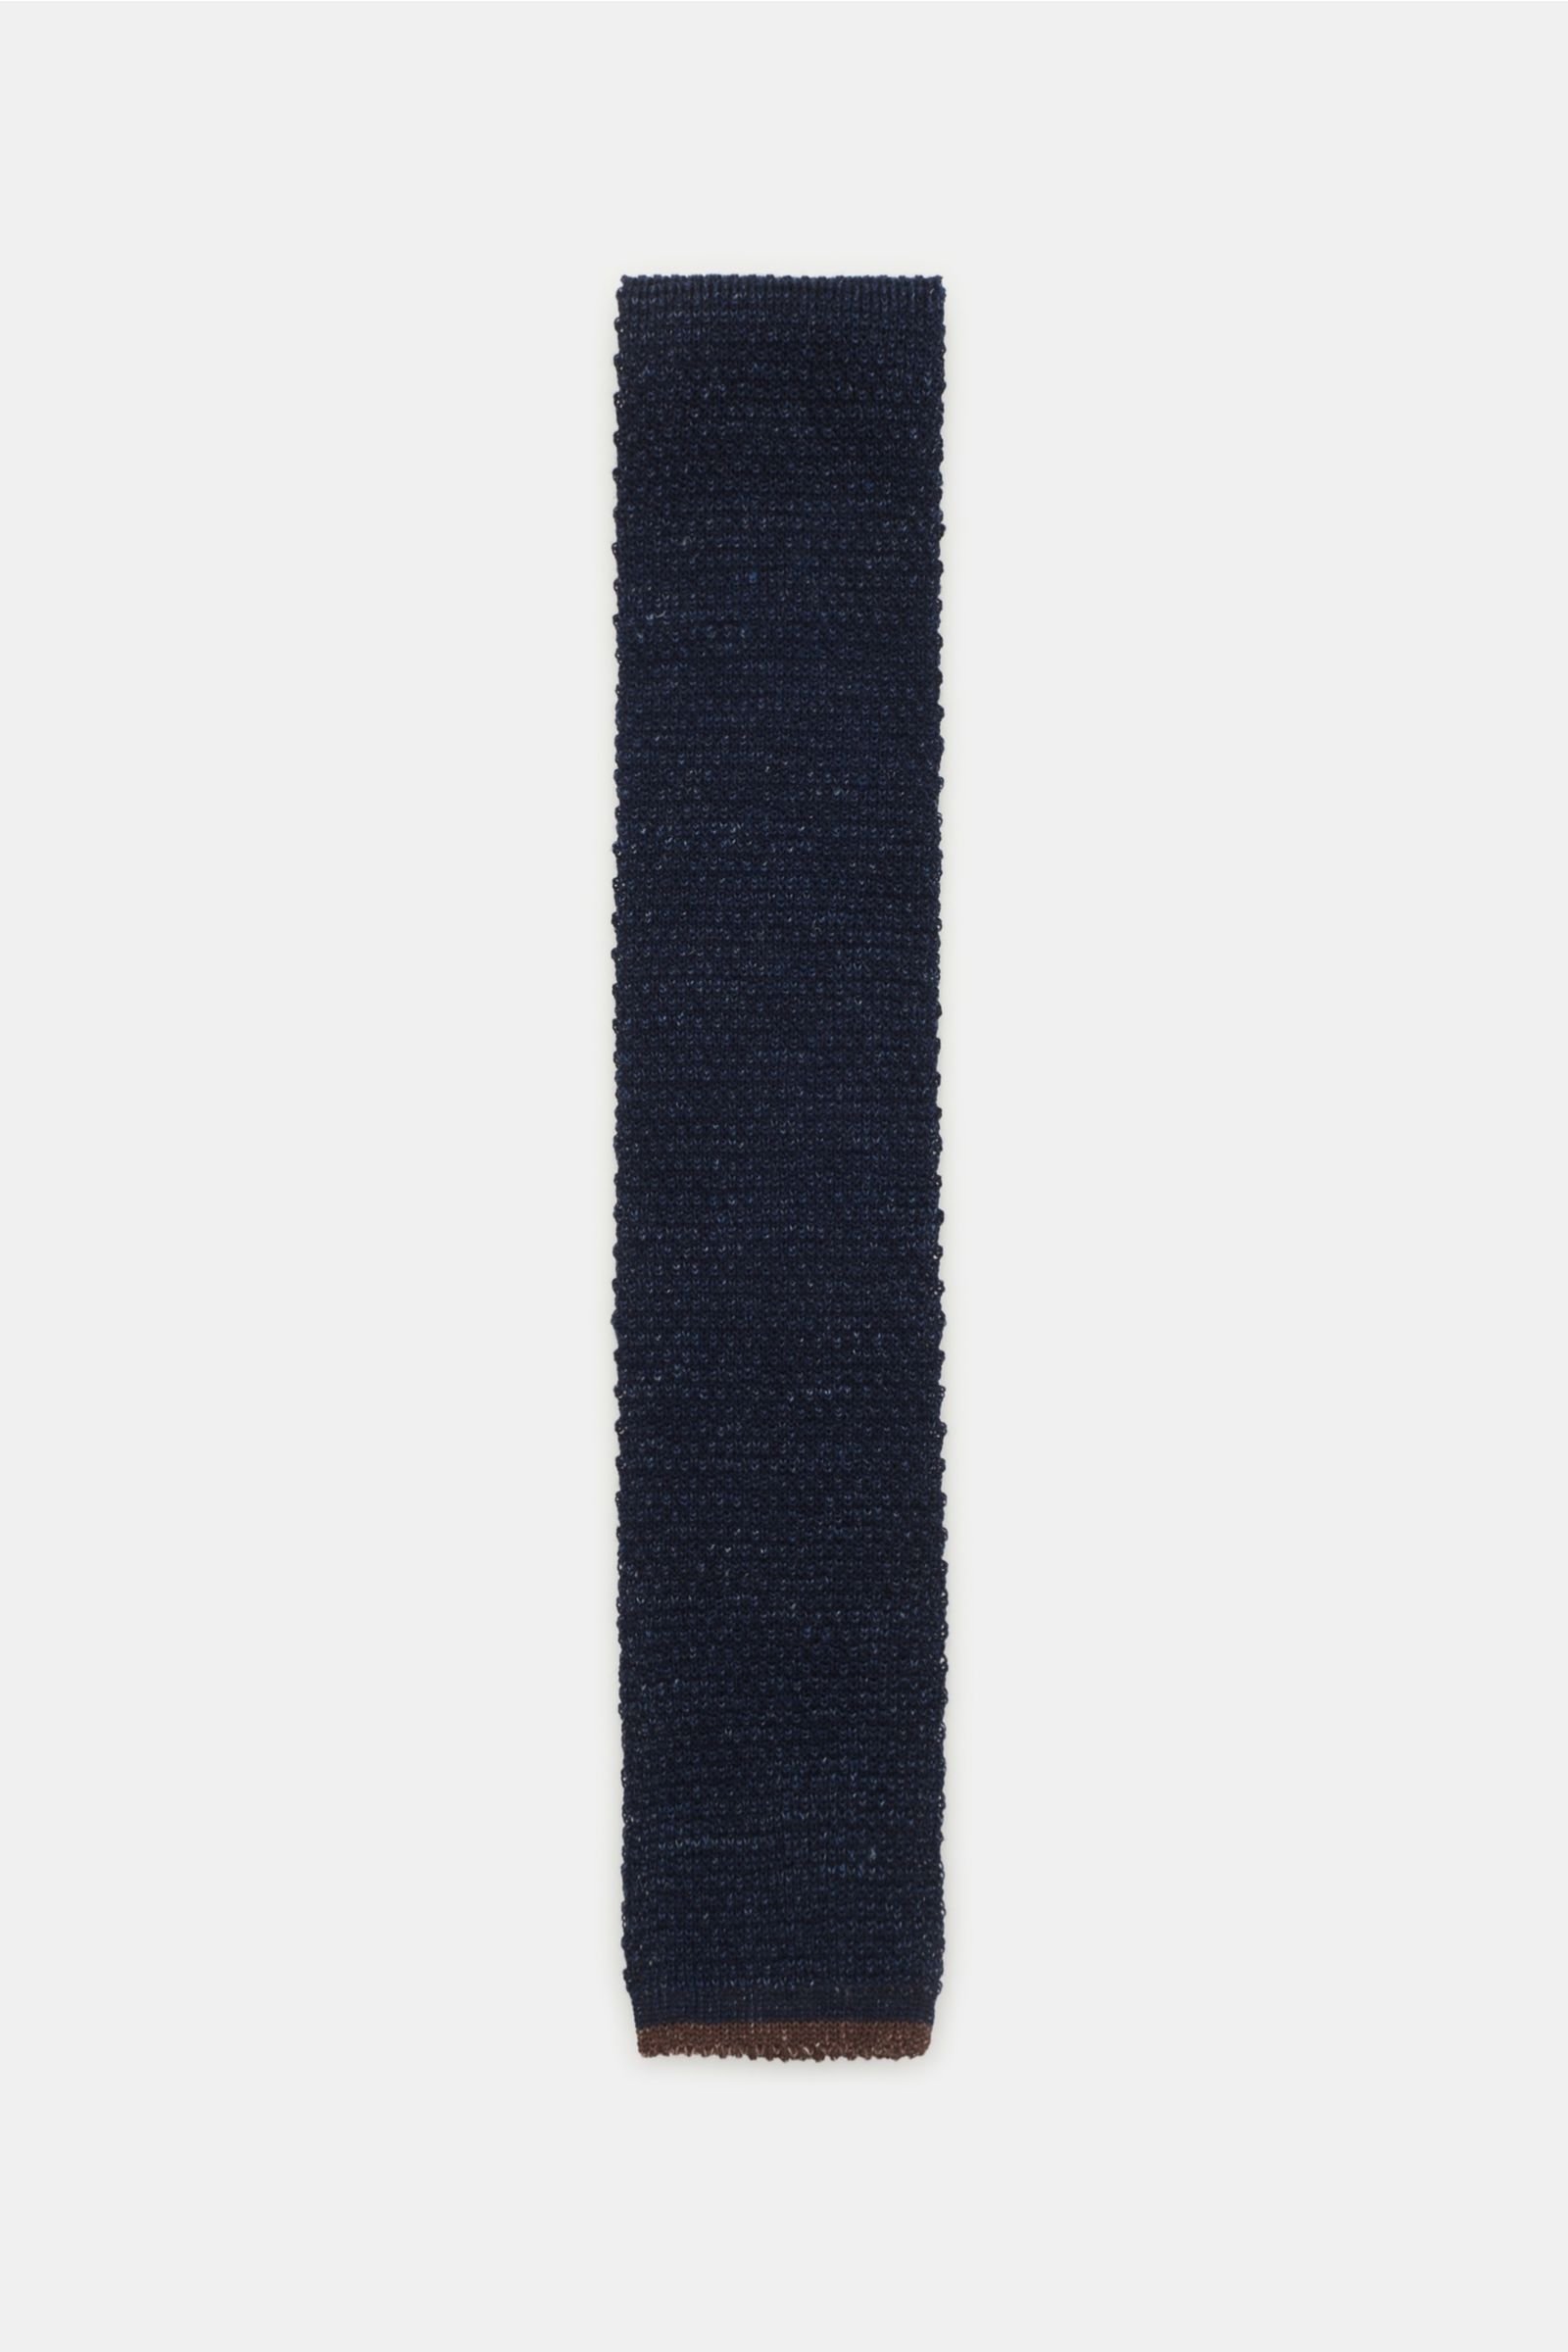 Knitted tie navy